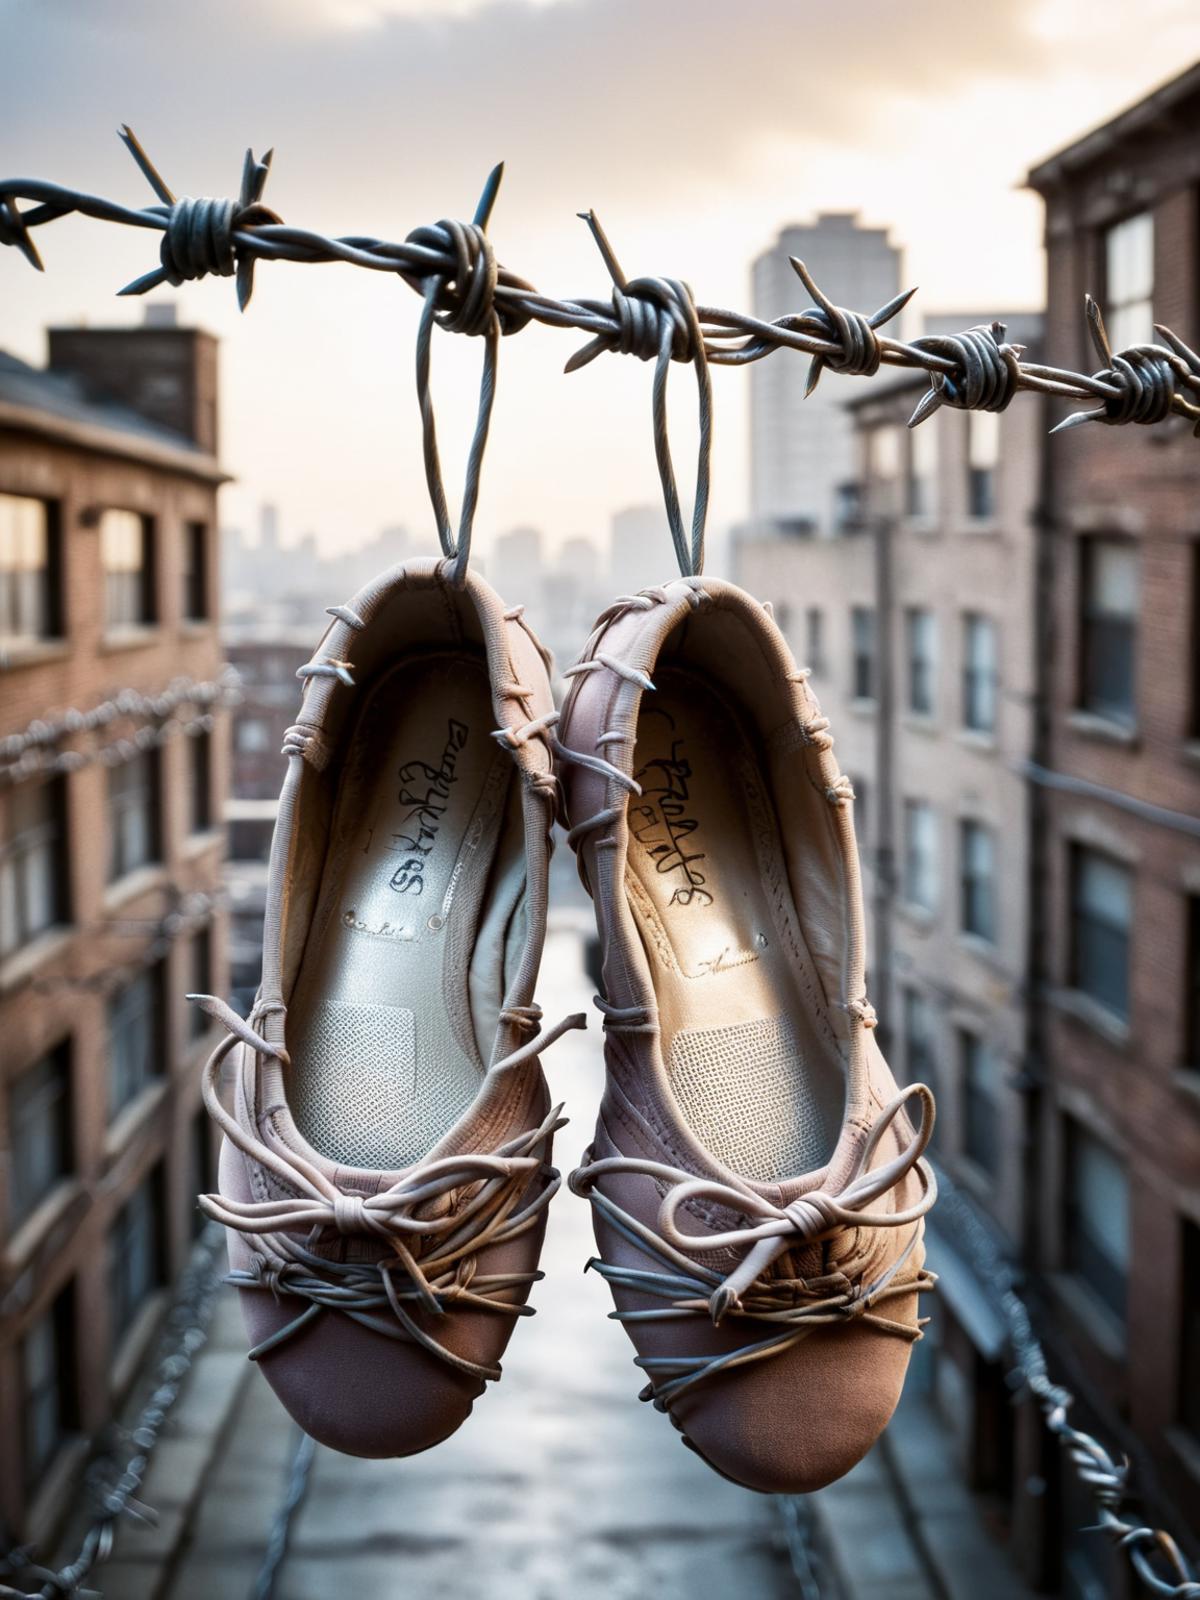 A pair of shoes hanging from a wire fence in front of a city skyline.